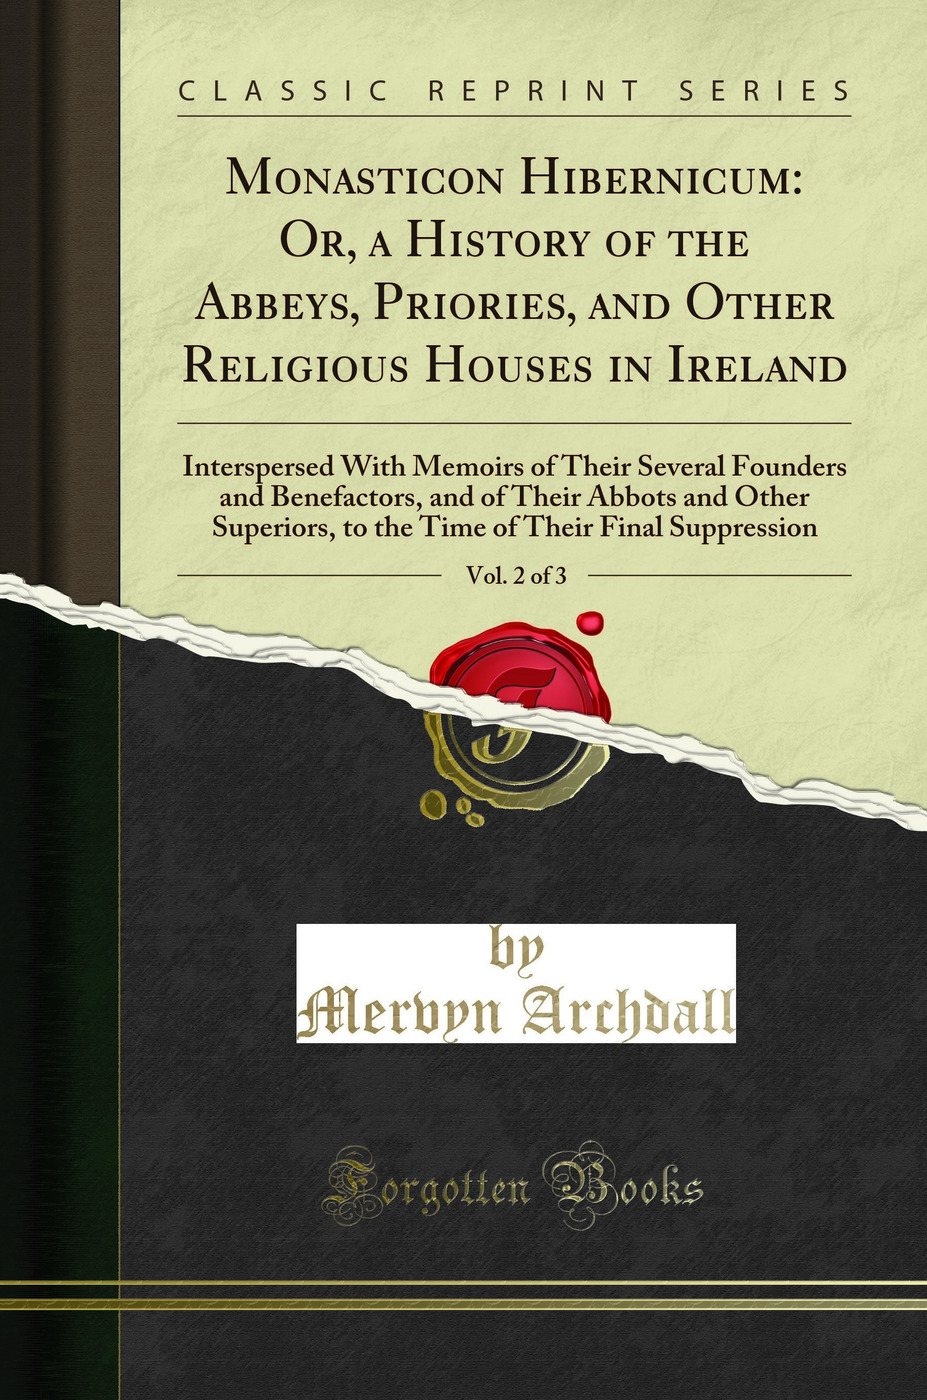 Monasticon Hibernicum: Or, a History of the Abbeys, Priories, and Other - Mervyn Archdall